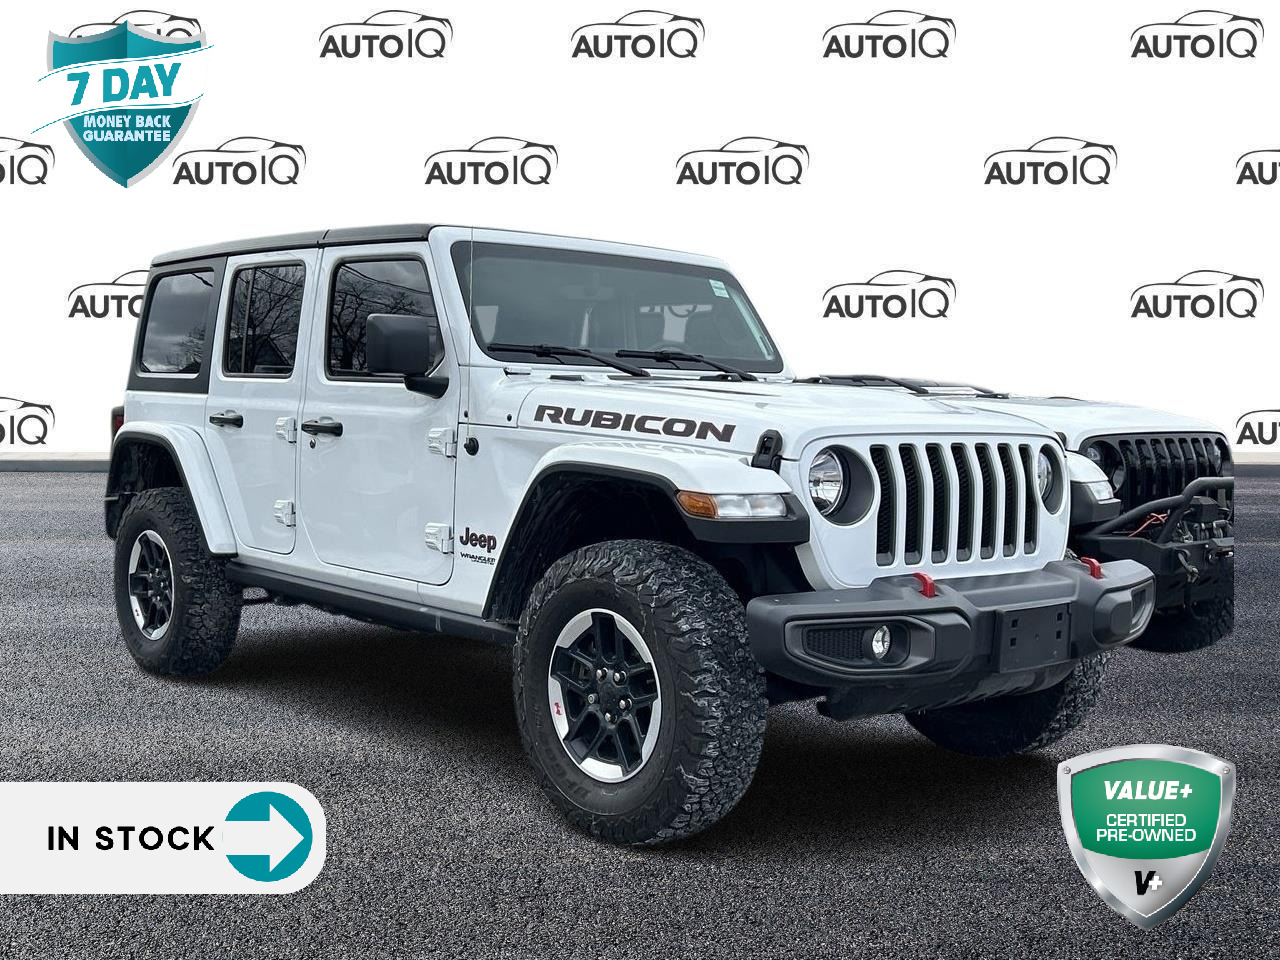 2022 Jeep WRANGLER UNLIMITED Rubicon COLD WEATHER PKG. | NAV SYSTEM | UCONNECT4